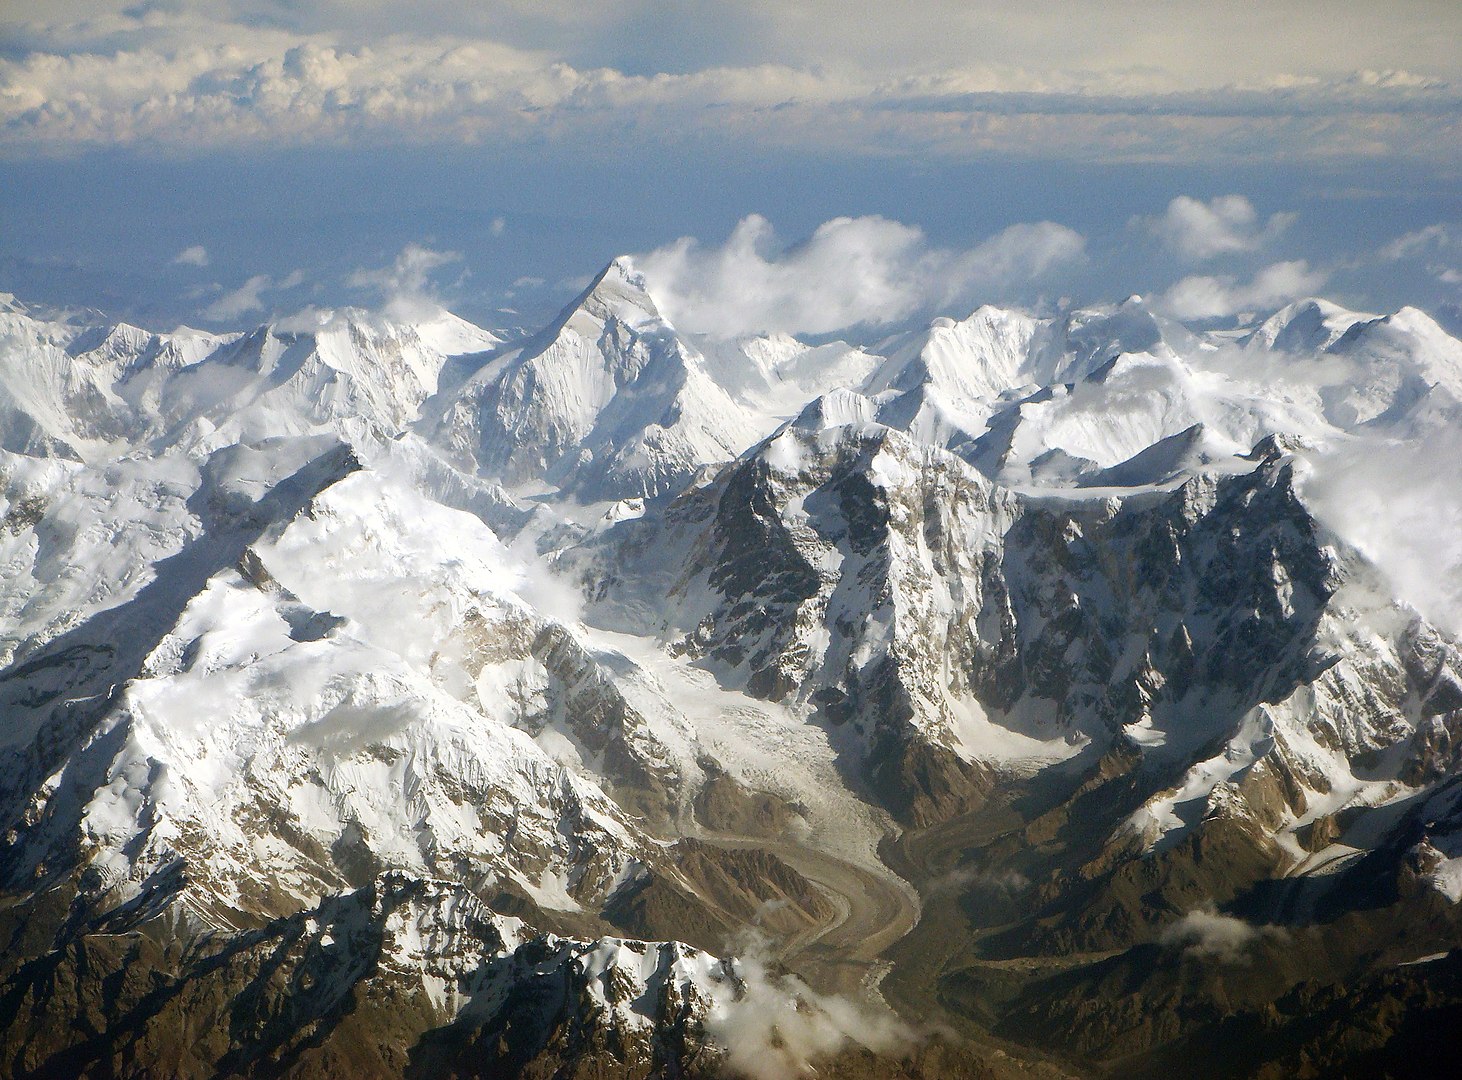 The race passes through the Tian Shan mountains, through which the Silk Road Mountain Bike Race passes